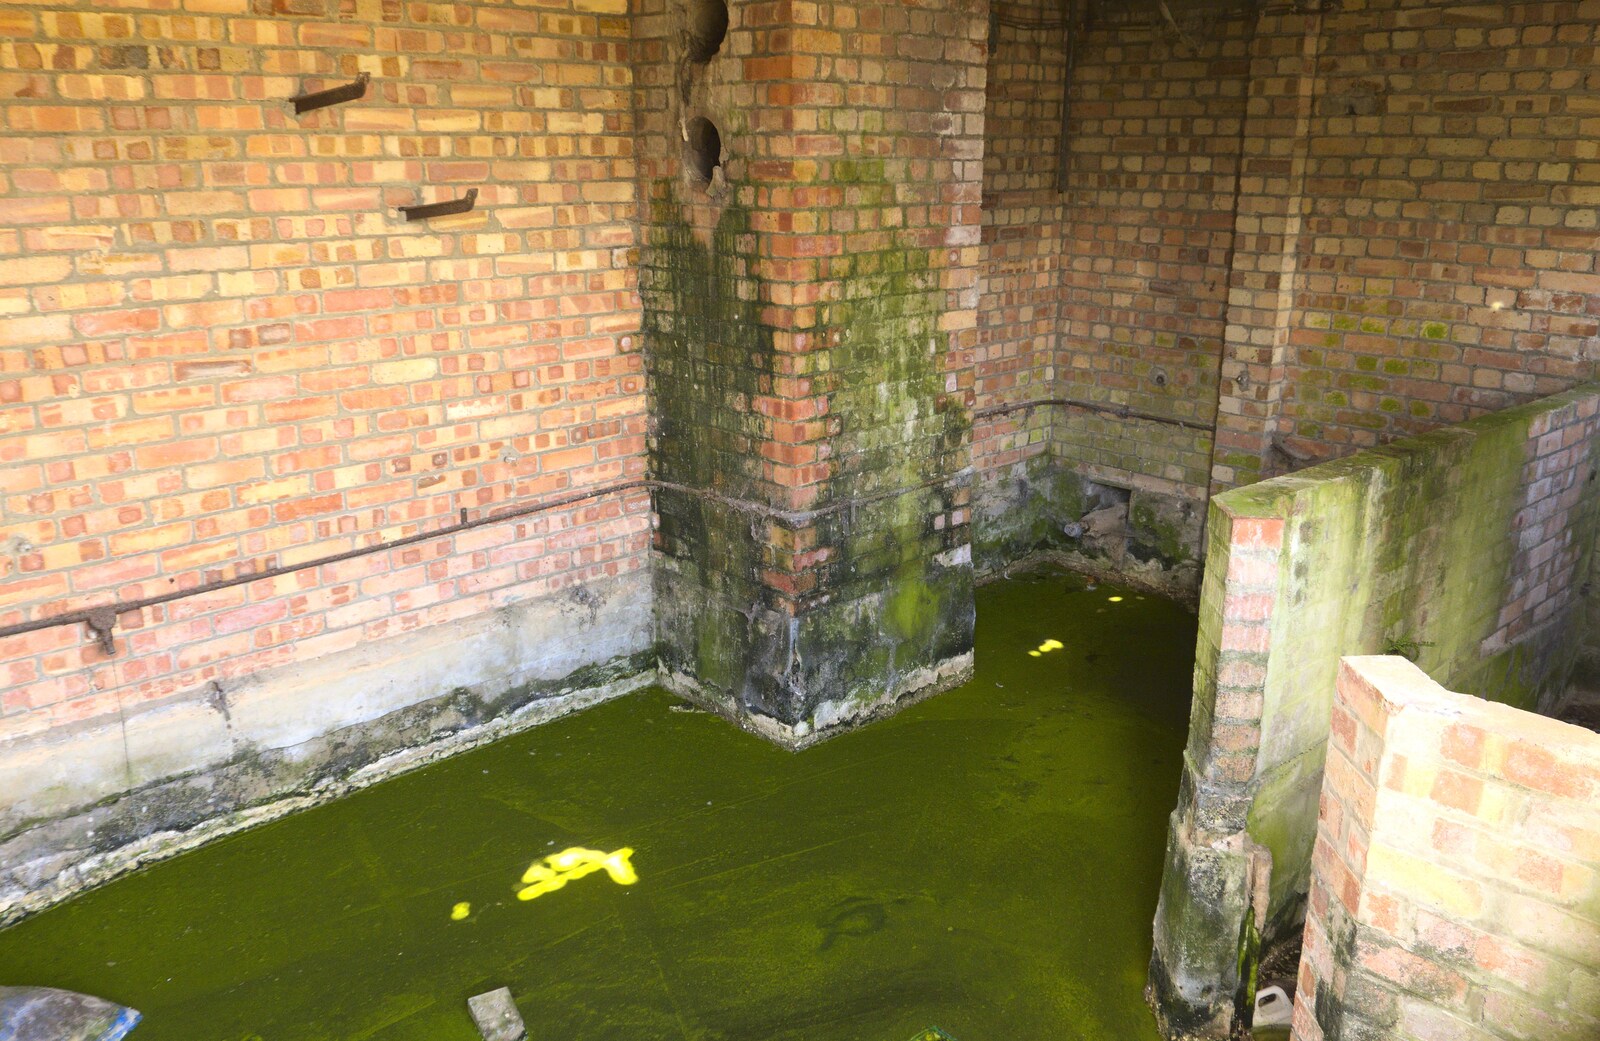 Green algae on a pool of water from A 1940s Timewarp, Site 4, Bungay Airfield, Flixton, Suffolk - 9th June 2022